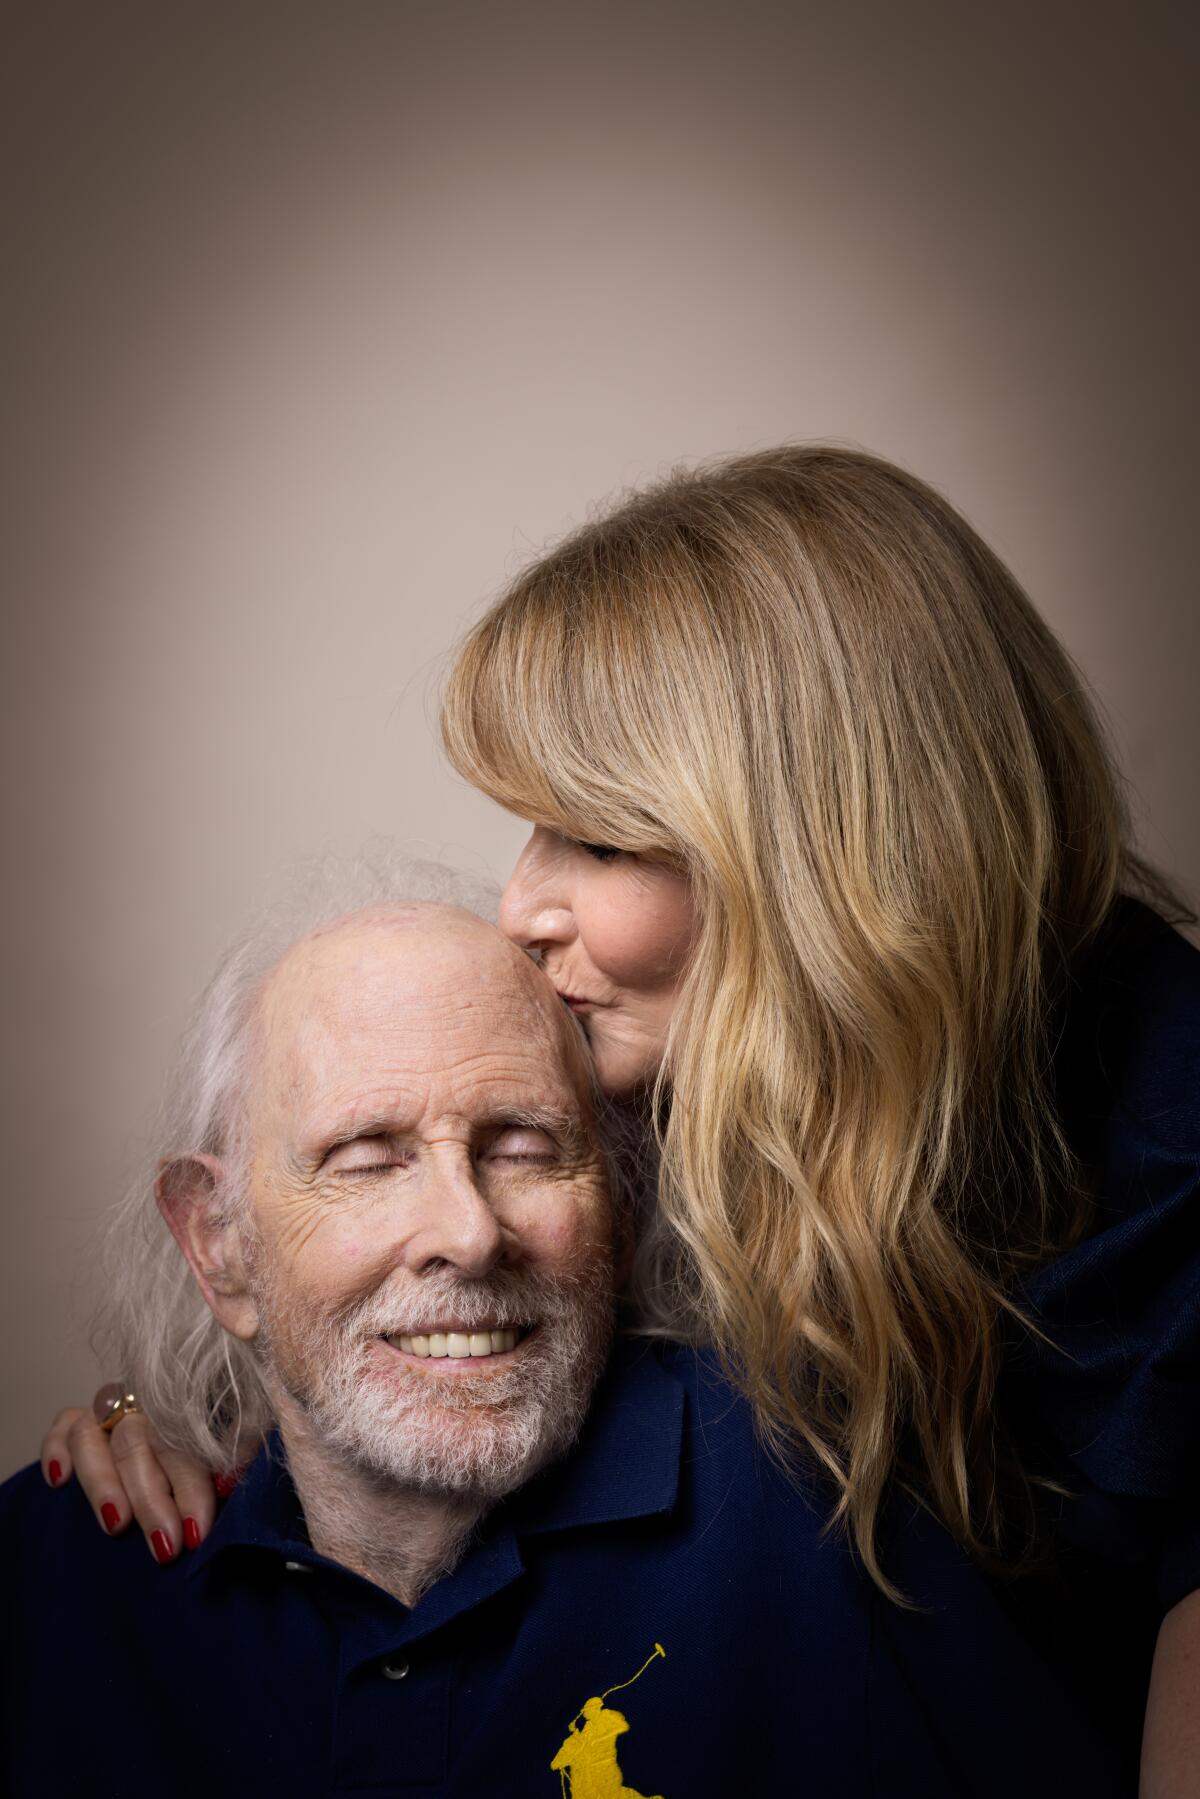 A blonde woman kisses the top of the head of an older man with white hair and a white beard.